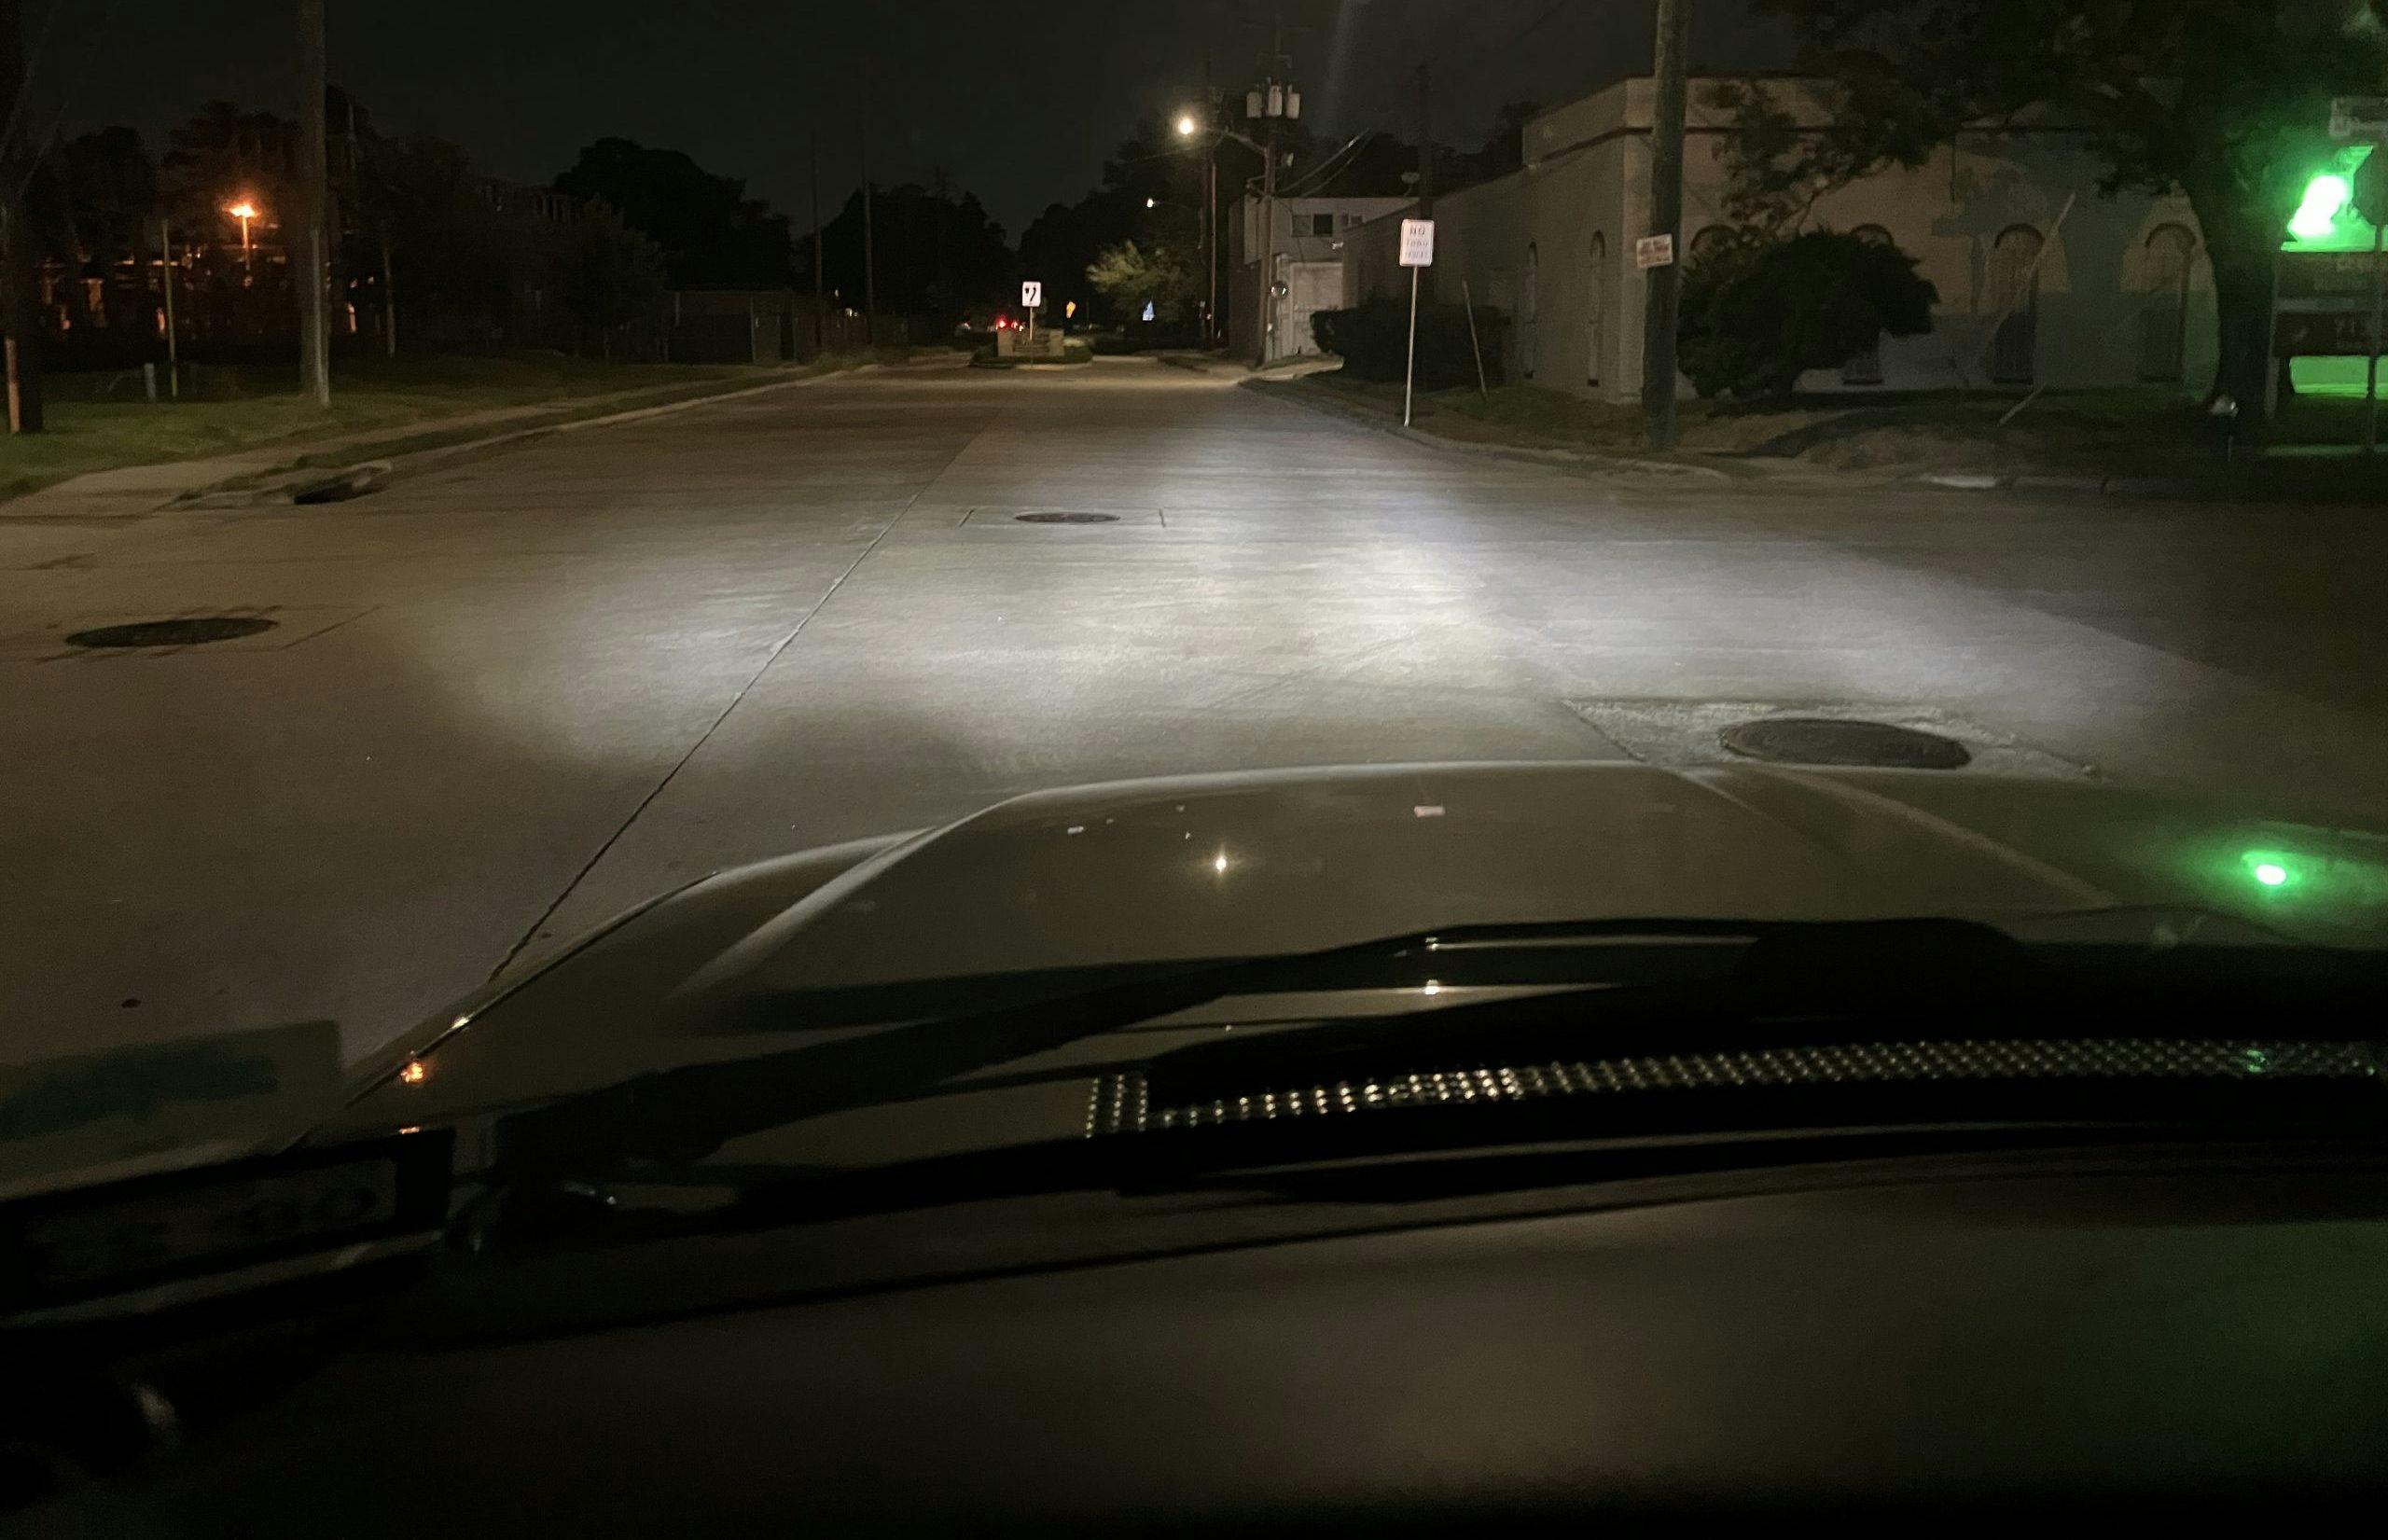 Drop-in headlights are better, but not good enough - Media